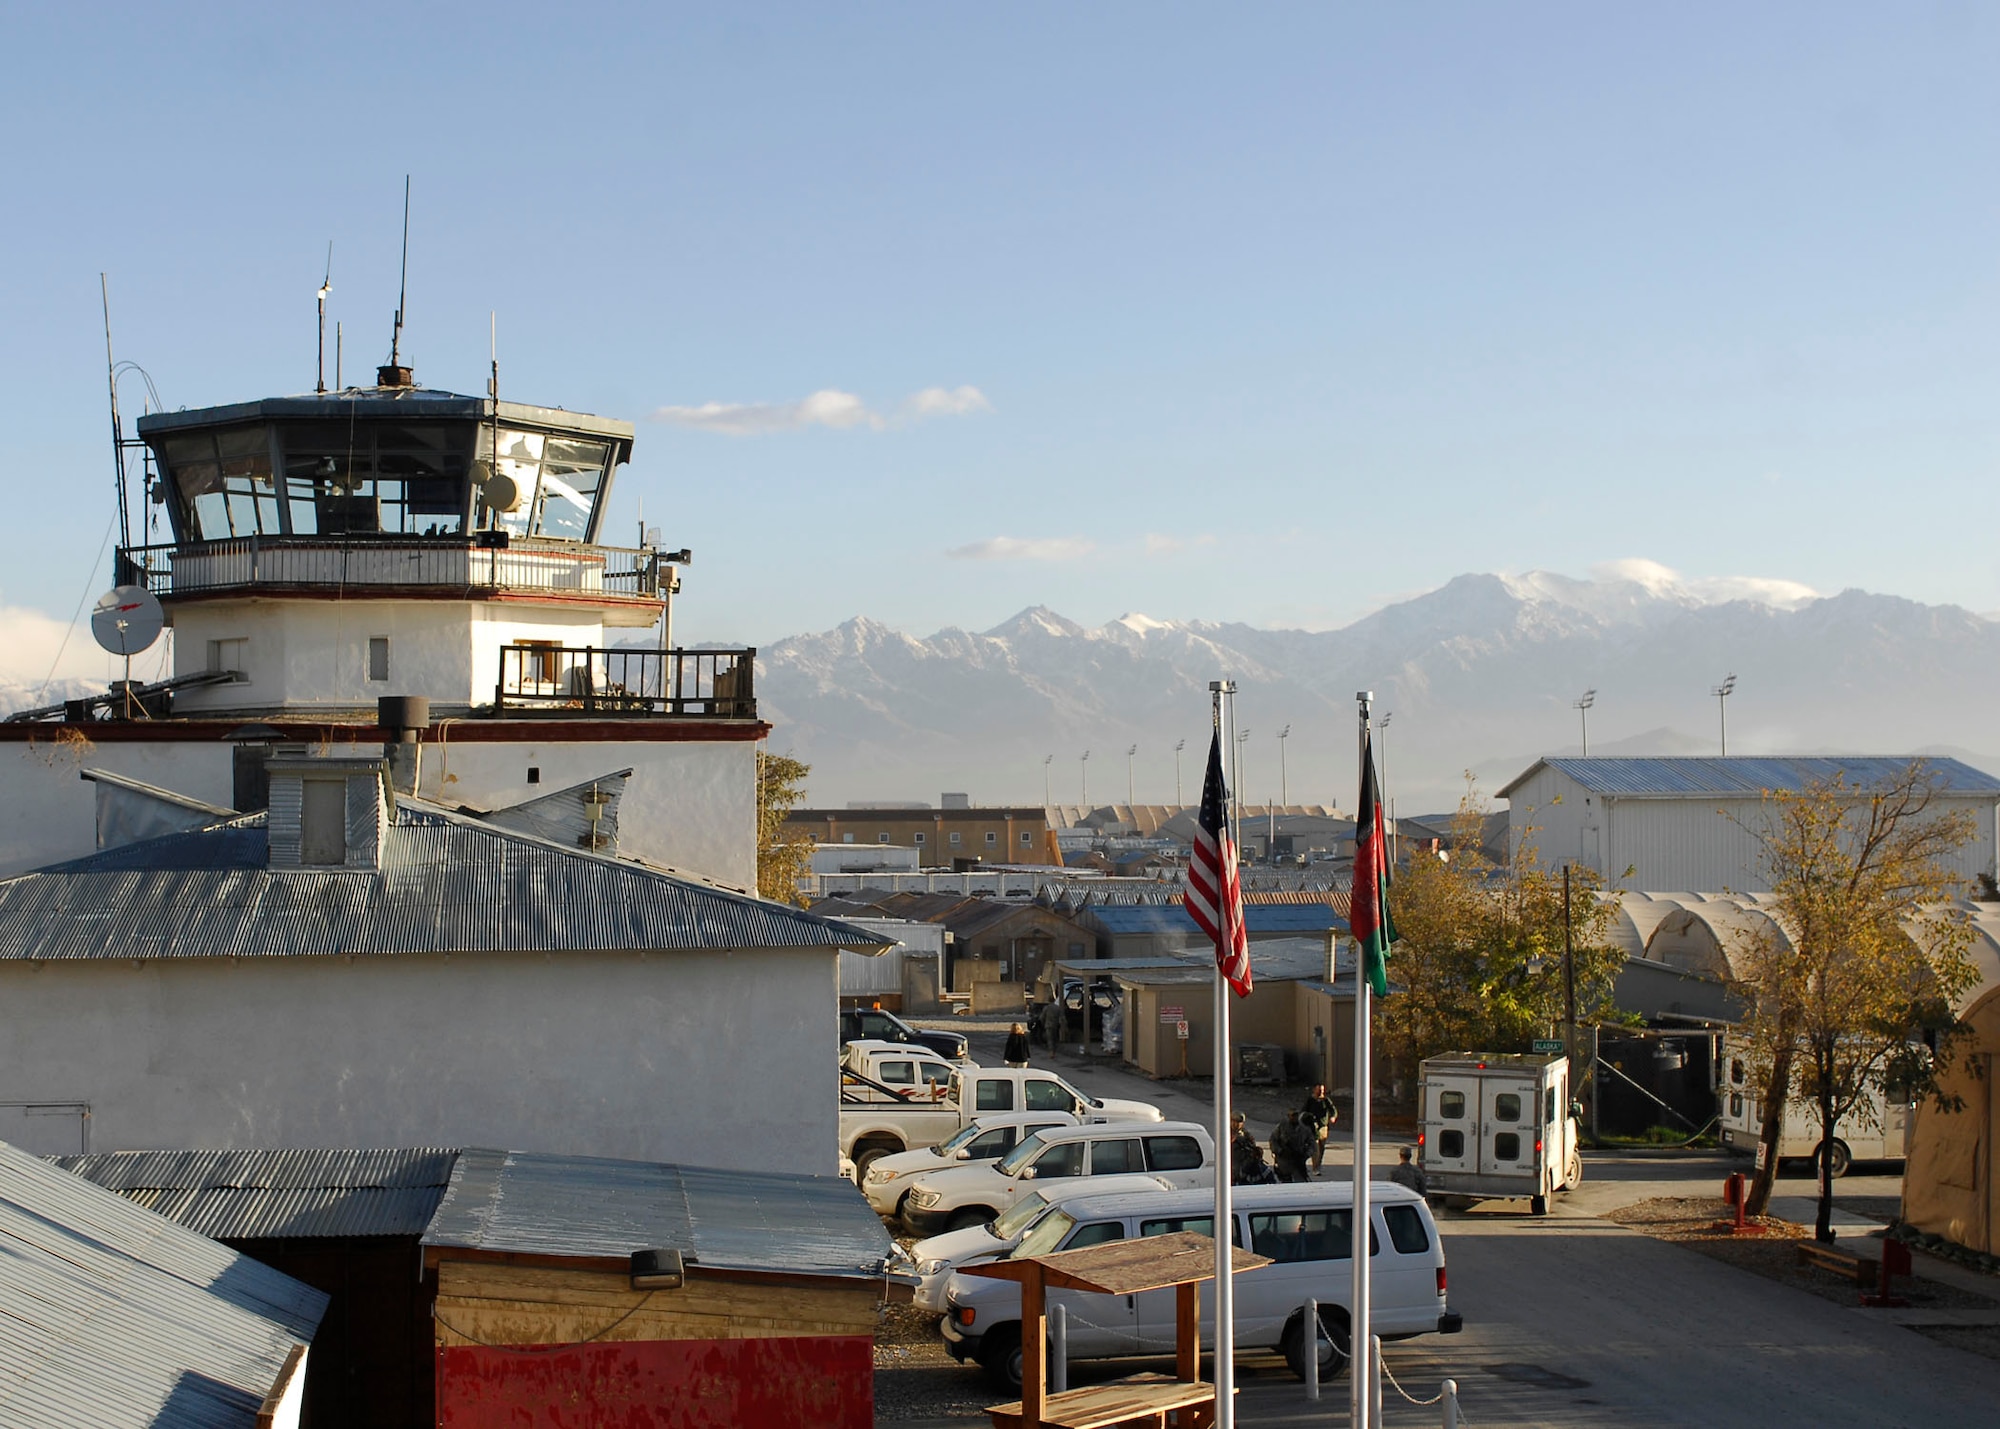 BAGRAM AIRFIELD, Afghanistan -- Beautiful mountains in Afghanistan are visible behind the old Russian Control Tower, known as the Crow's Nest,   Nov. 9, 2009.  The Russian Control Tower was built in 1976 during the Soviet Union's occupation of the region.  Currently more than 5,000 Airmen are deployed to Bagram supporting Operation Enduring Freedom and NATO International Security Assistance Forces.  (U.S. Air Force photo/Senior Airman Felicia Juenke)